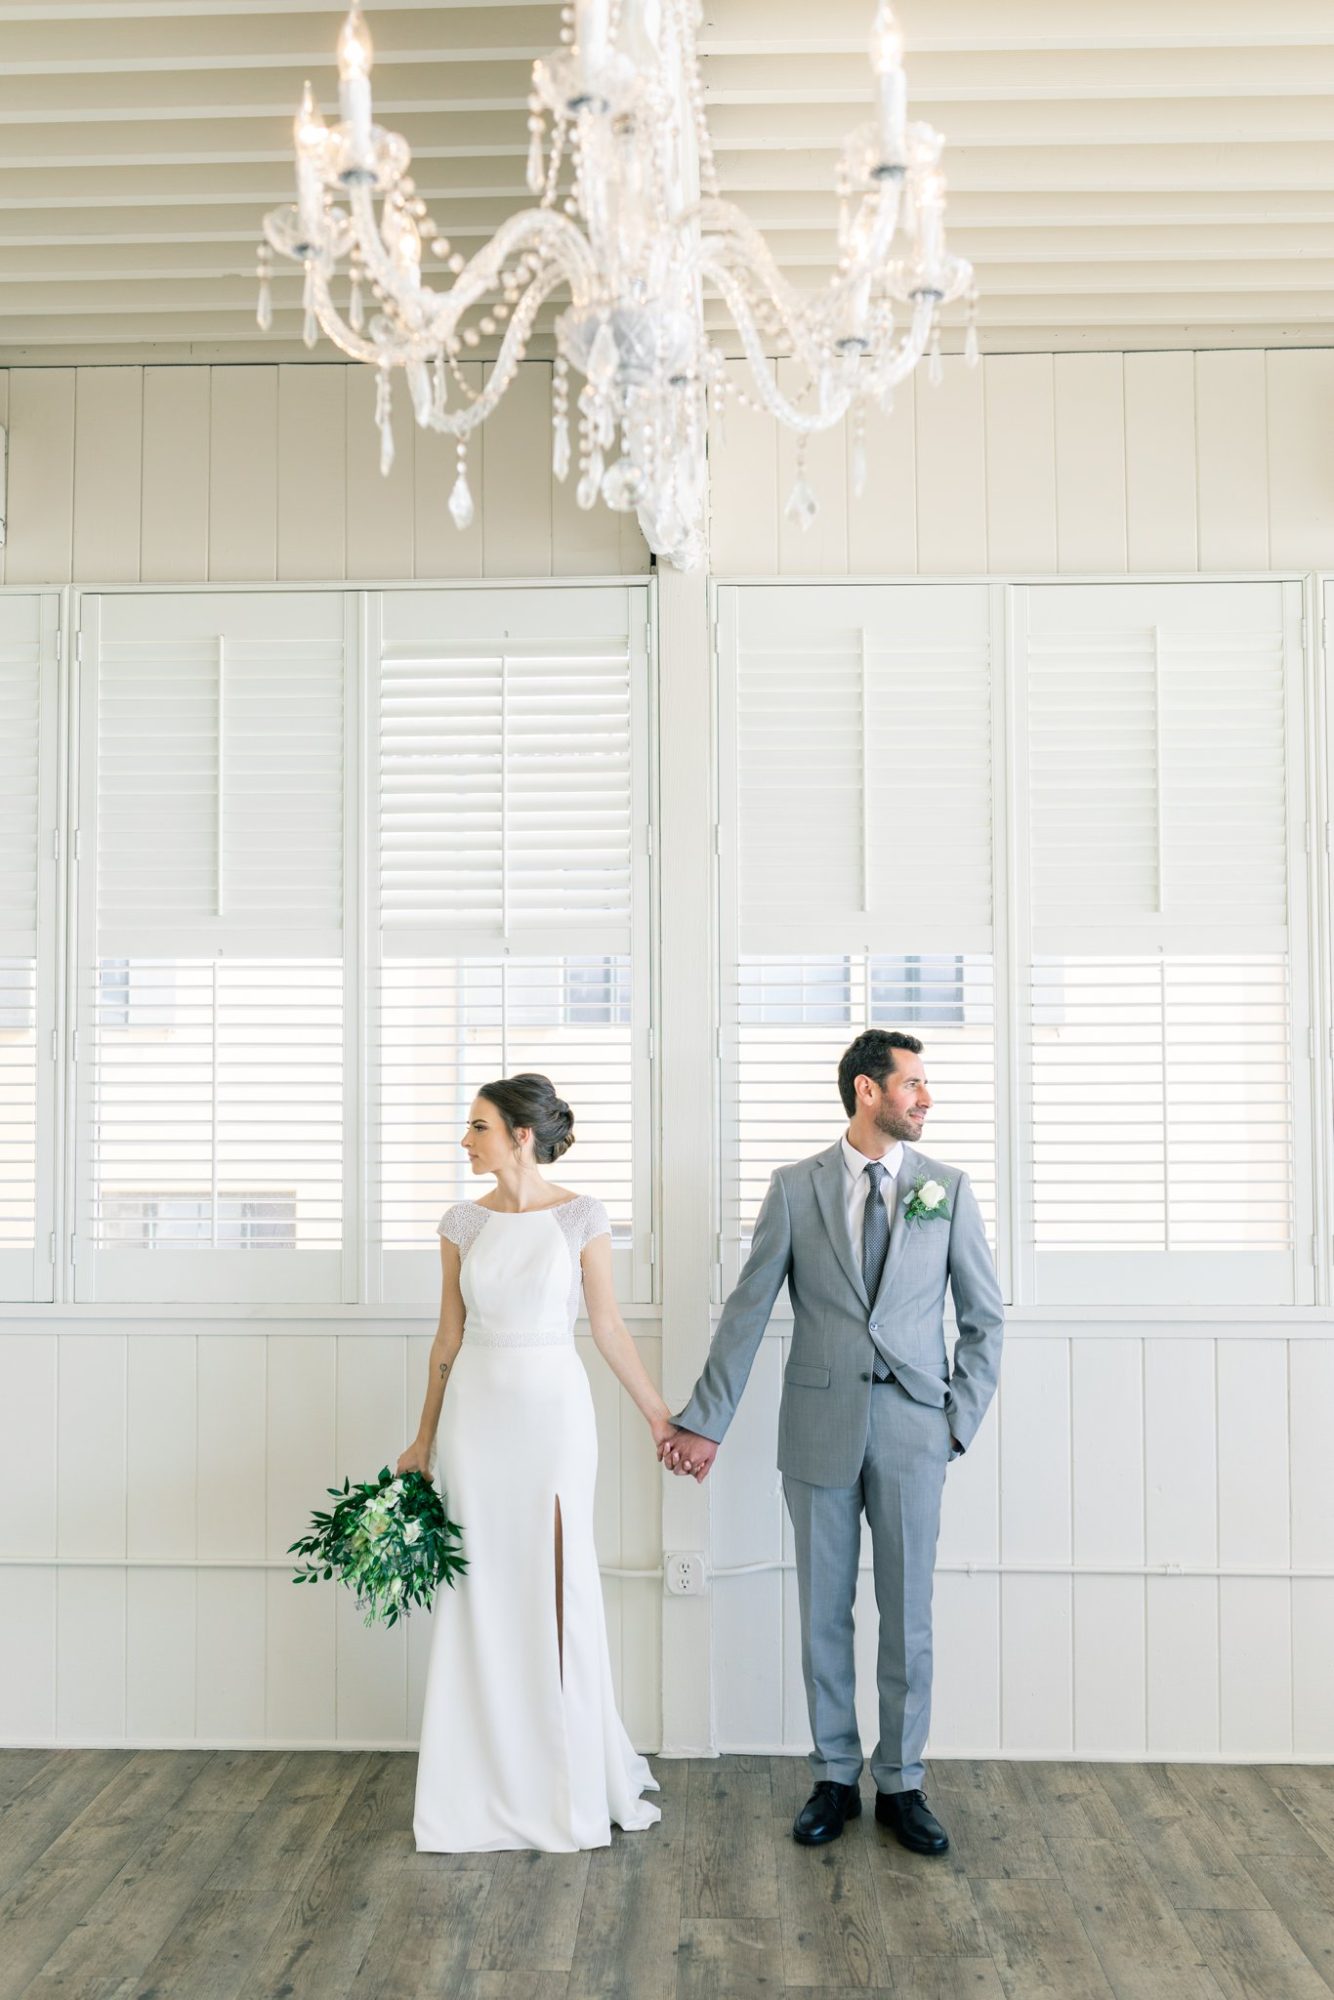 This Couple's Fun Wedding Was Held at a Historic Venue in San